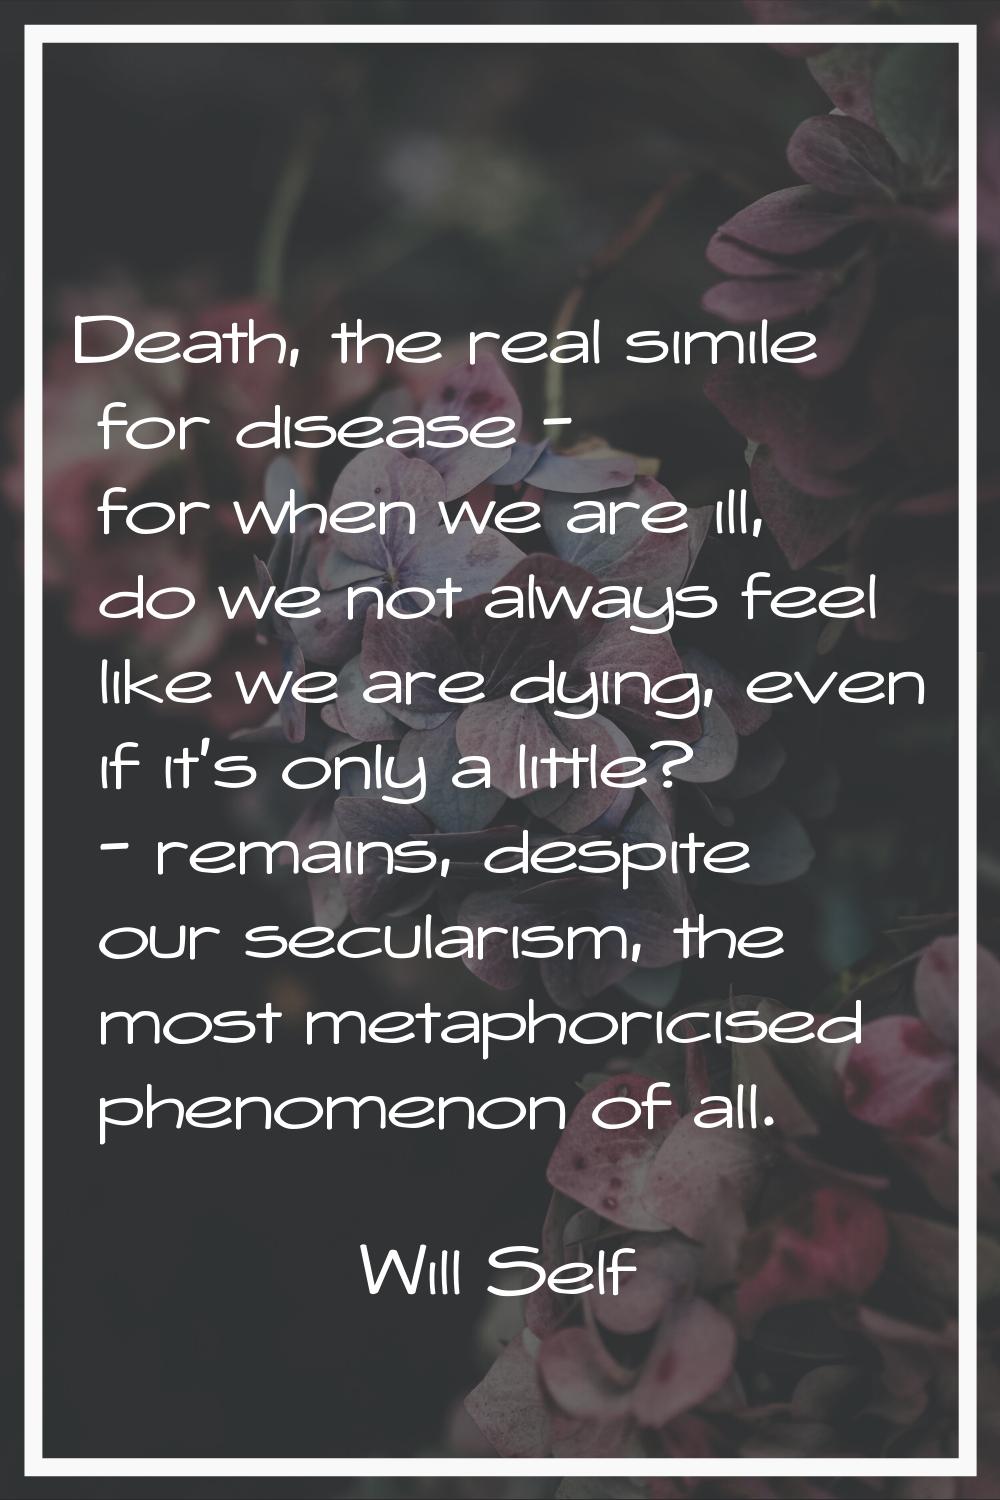 Death, the real simile for disease - for when we are ill, do we not always feel like we are dying, 